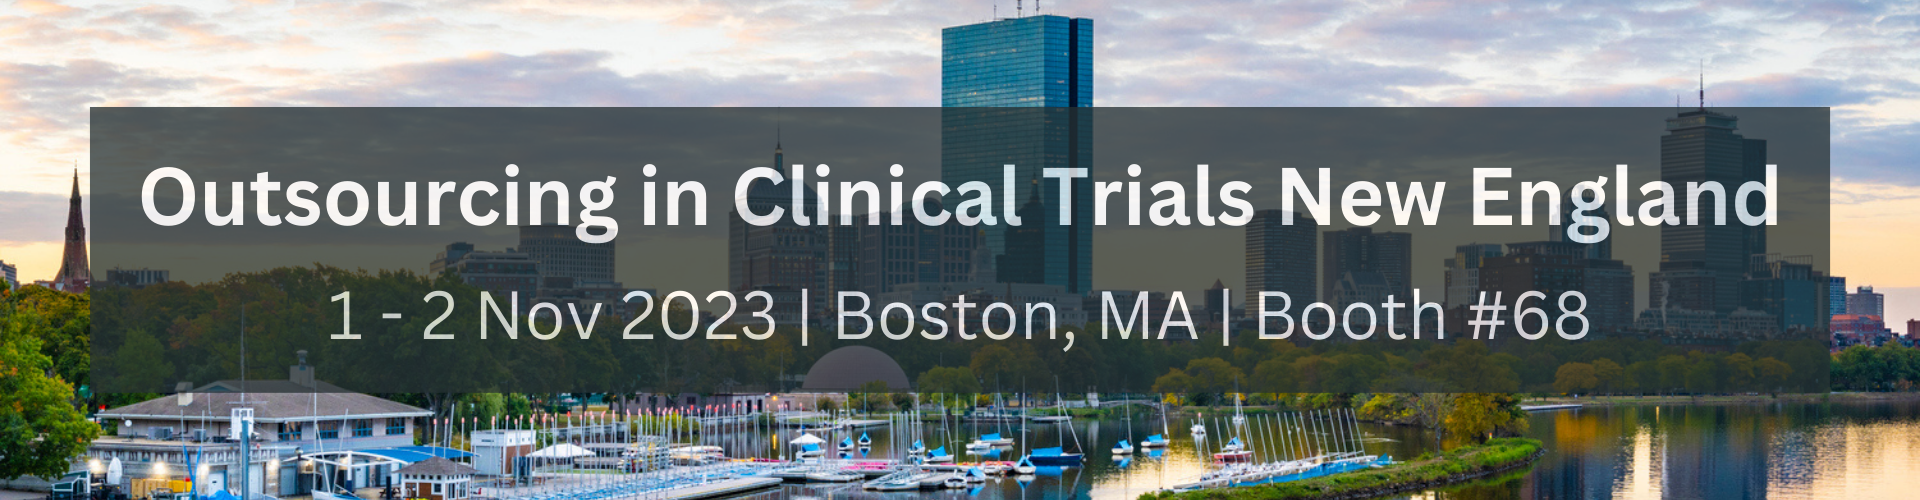 Outsourcing in Clinical Trials New England 1 - 2 Nov 2023  Boston, Massachusetts  Booth #68 (1)